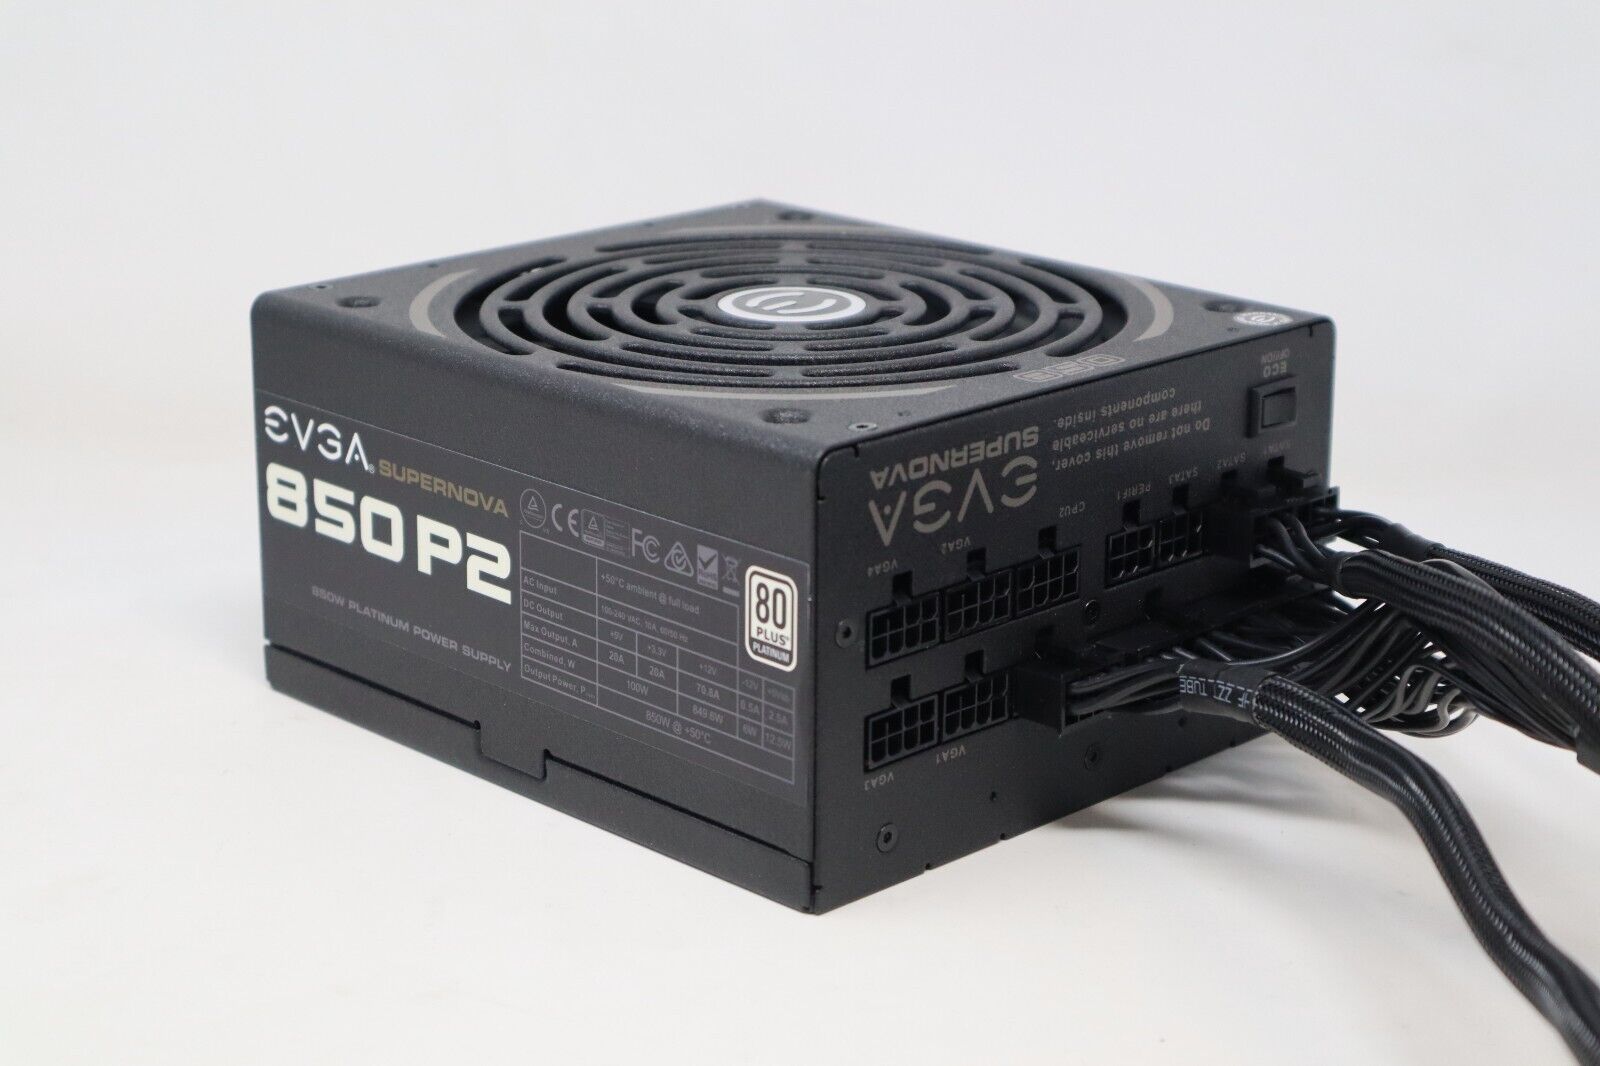 EVGA SuperNOVA 850 P2 850W Power Supply - Fully Tested & Functional